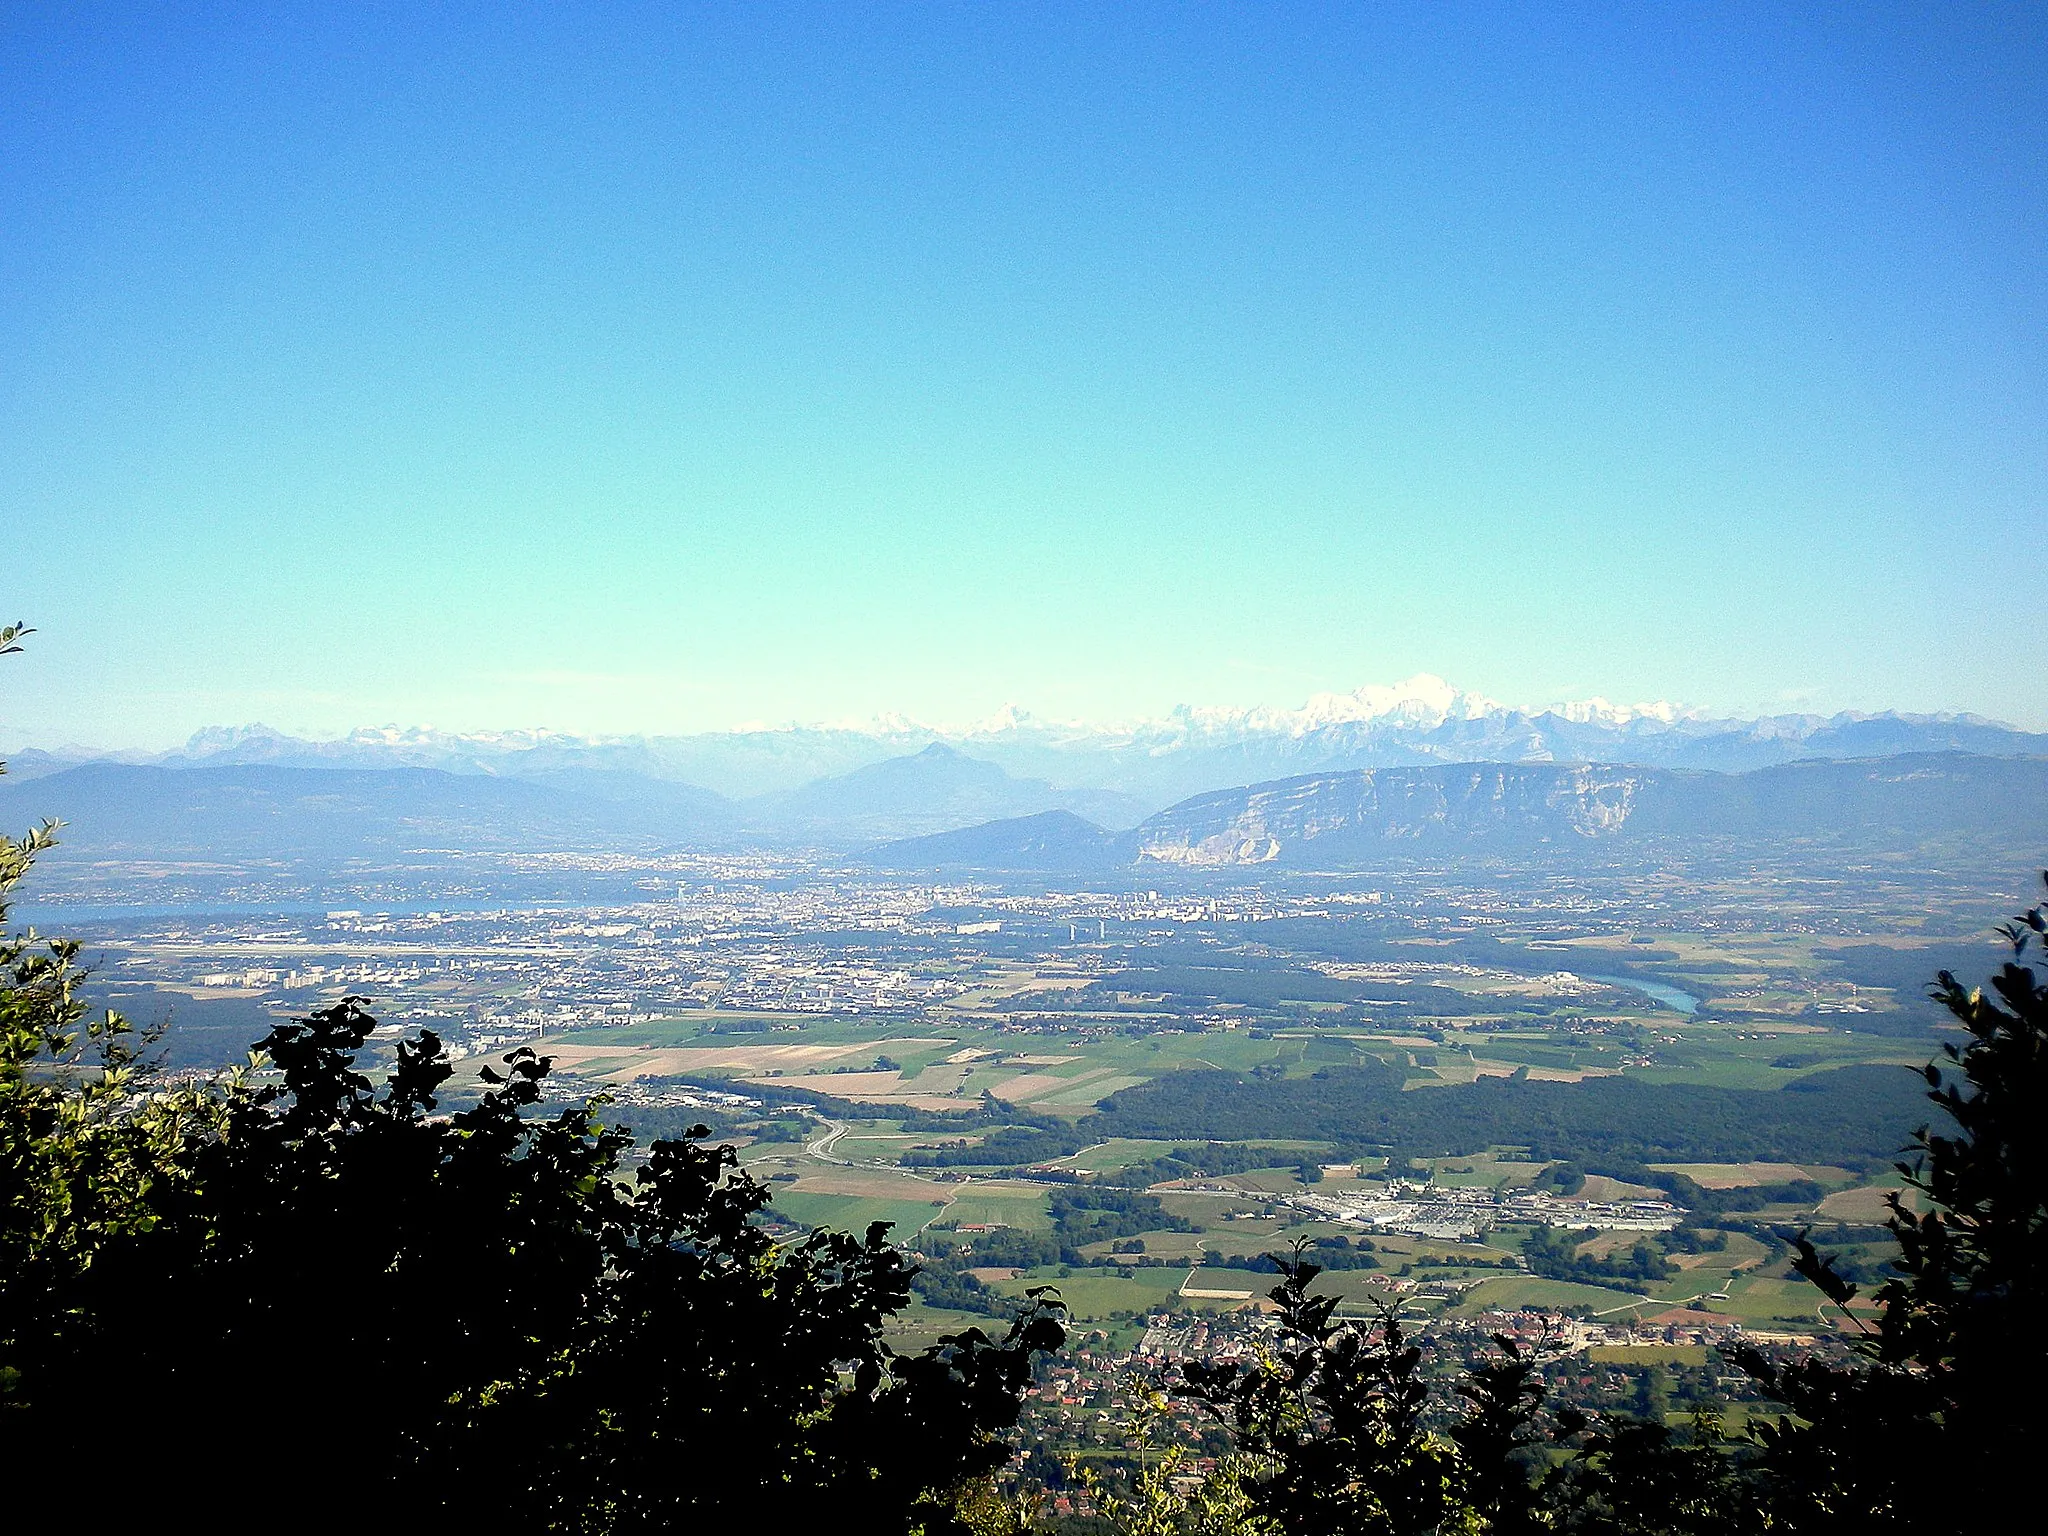 Photo showing: Panorama taken 200 m below the top of the Reculet (commune de Thoiry, department of Ain). On the foot of the mountain, one can see Thoiry, Geneva, Annemasse and the Saleve, On the vanishing line, the Mont-Blanc and Savoyard Alps